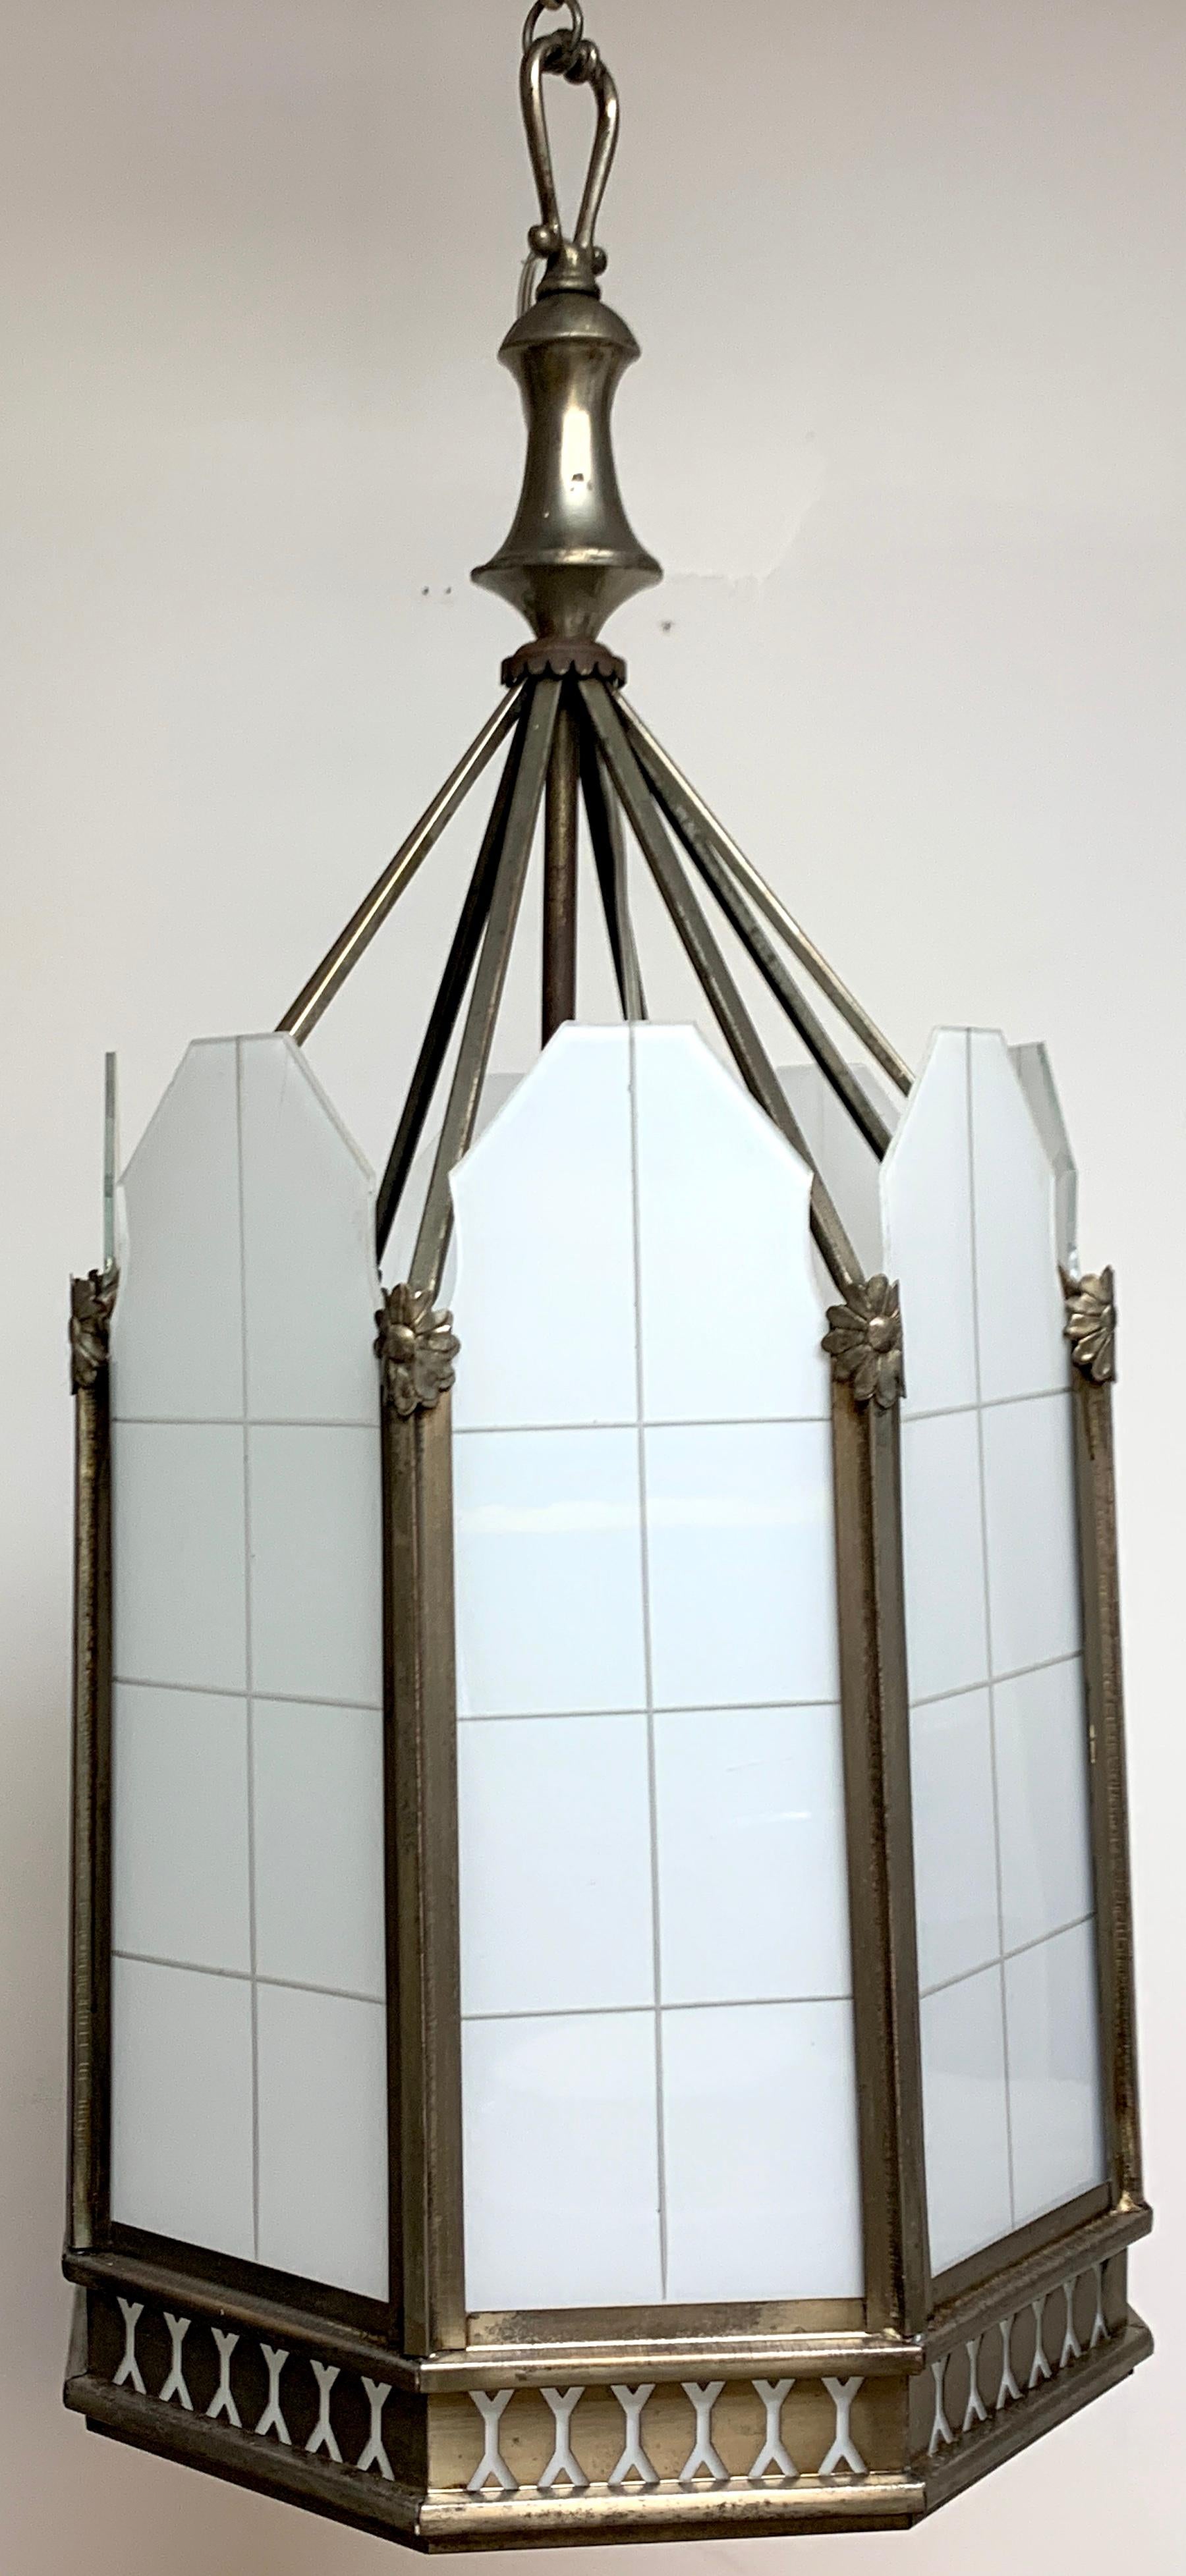 Art Deco octagon lantern from The El Cid Theatre, Los Angles, detailed deco Gothic silvered metal and engraved frosted glass 8-panel pendant. A splendid example of Historical Hollywood Memorabilia.
Lantern measures 28